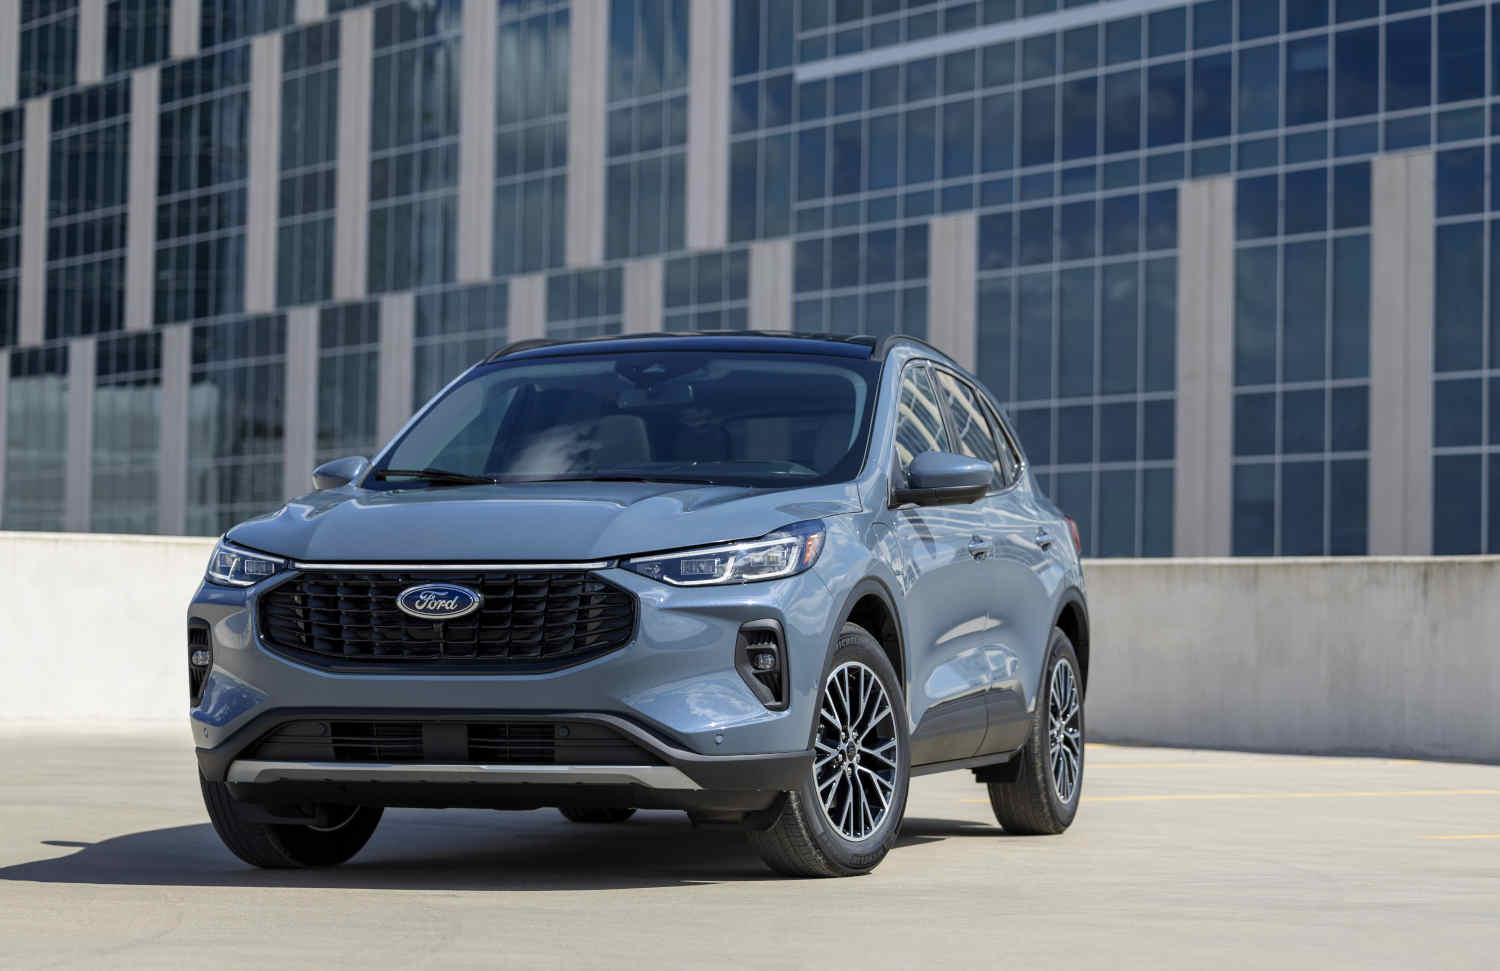 The first hybrid SUV was the Ford Escape, which is back for 2023